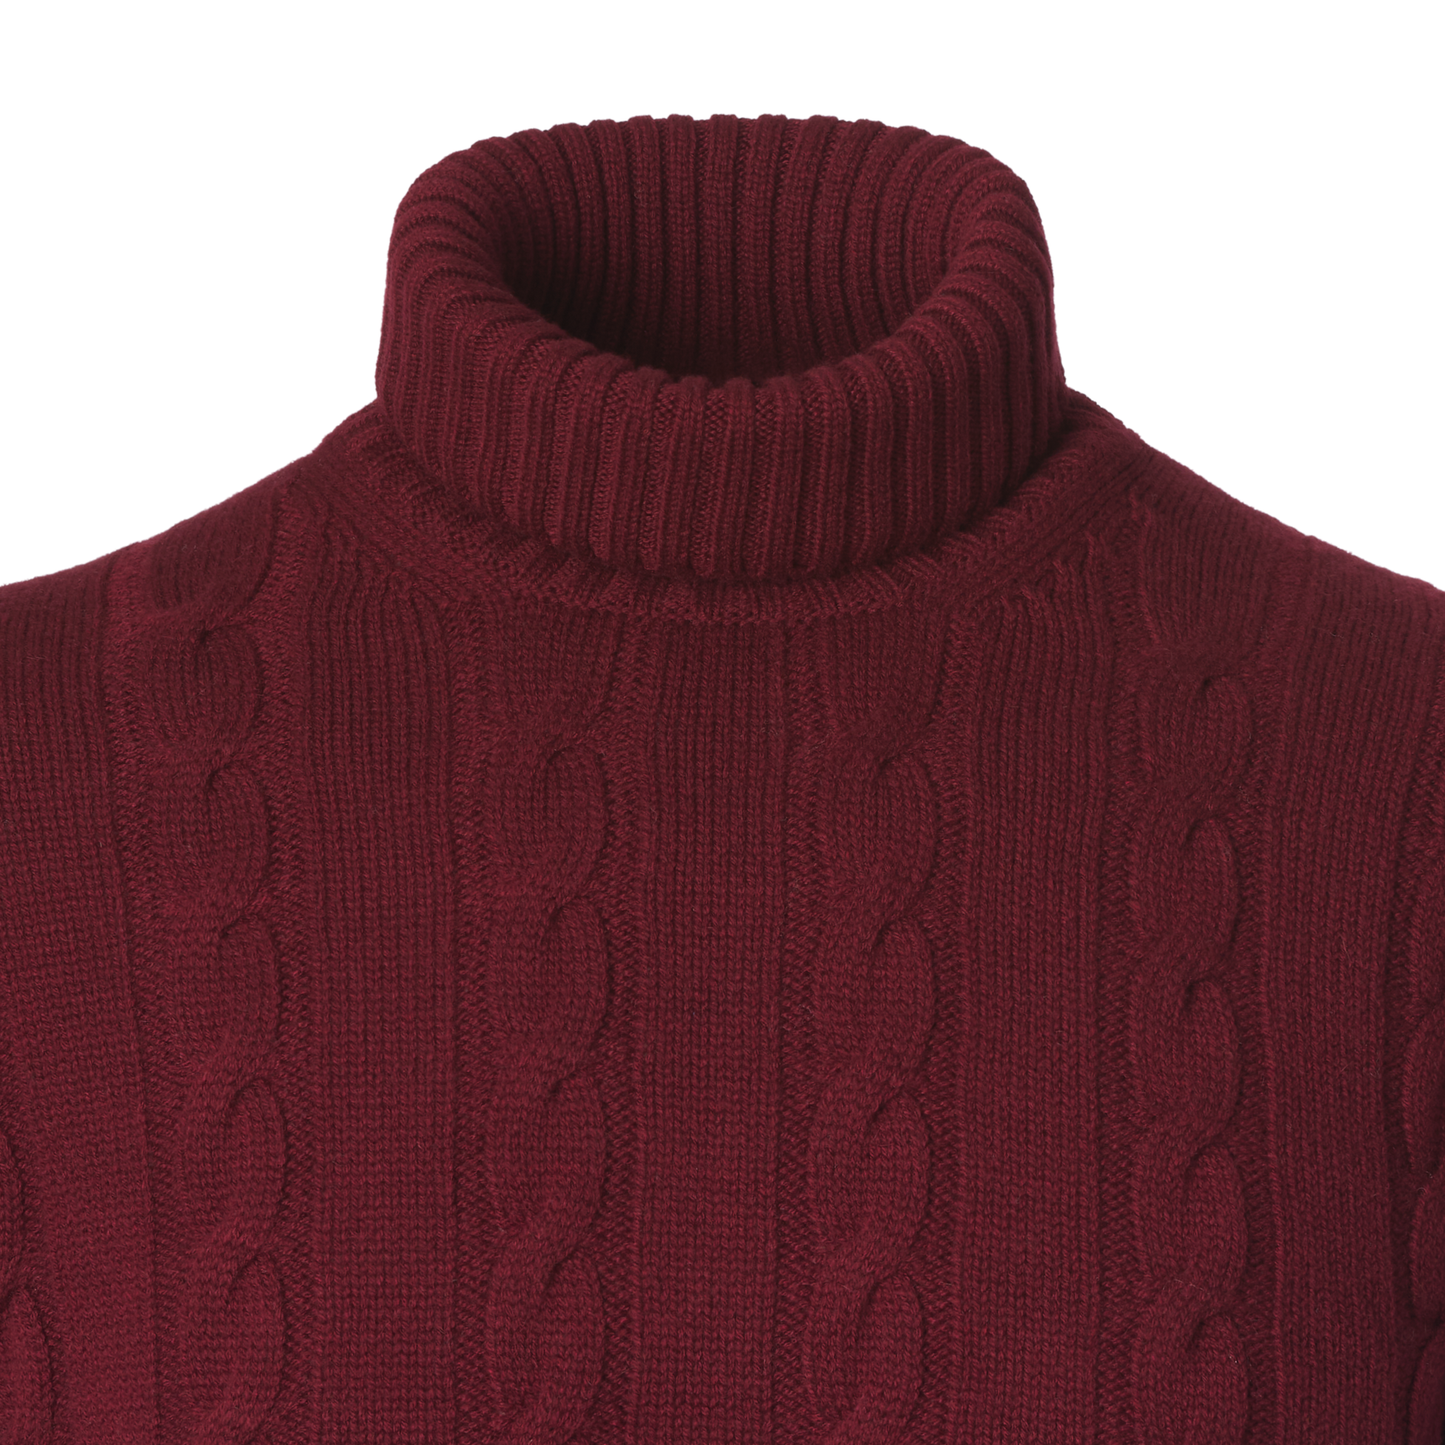 Luciano Barbera Turtleneck Cable-Knit Wool, Silk and Cashmere-Blend Sweater in Burgundy - SARTALE